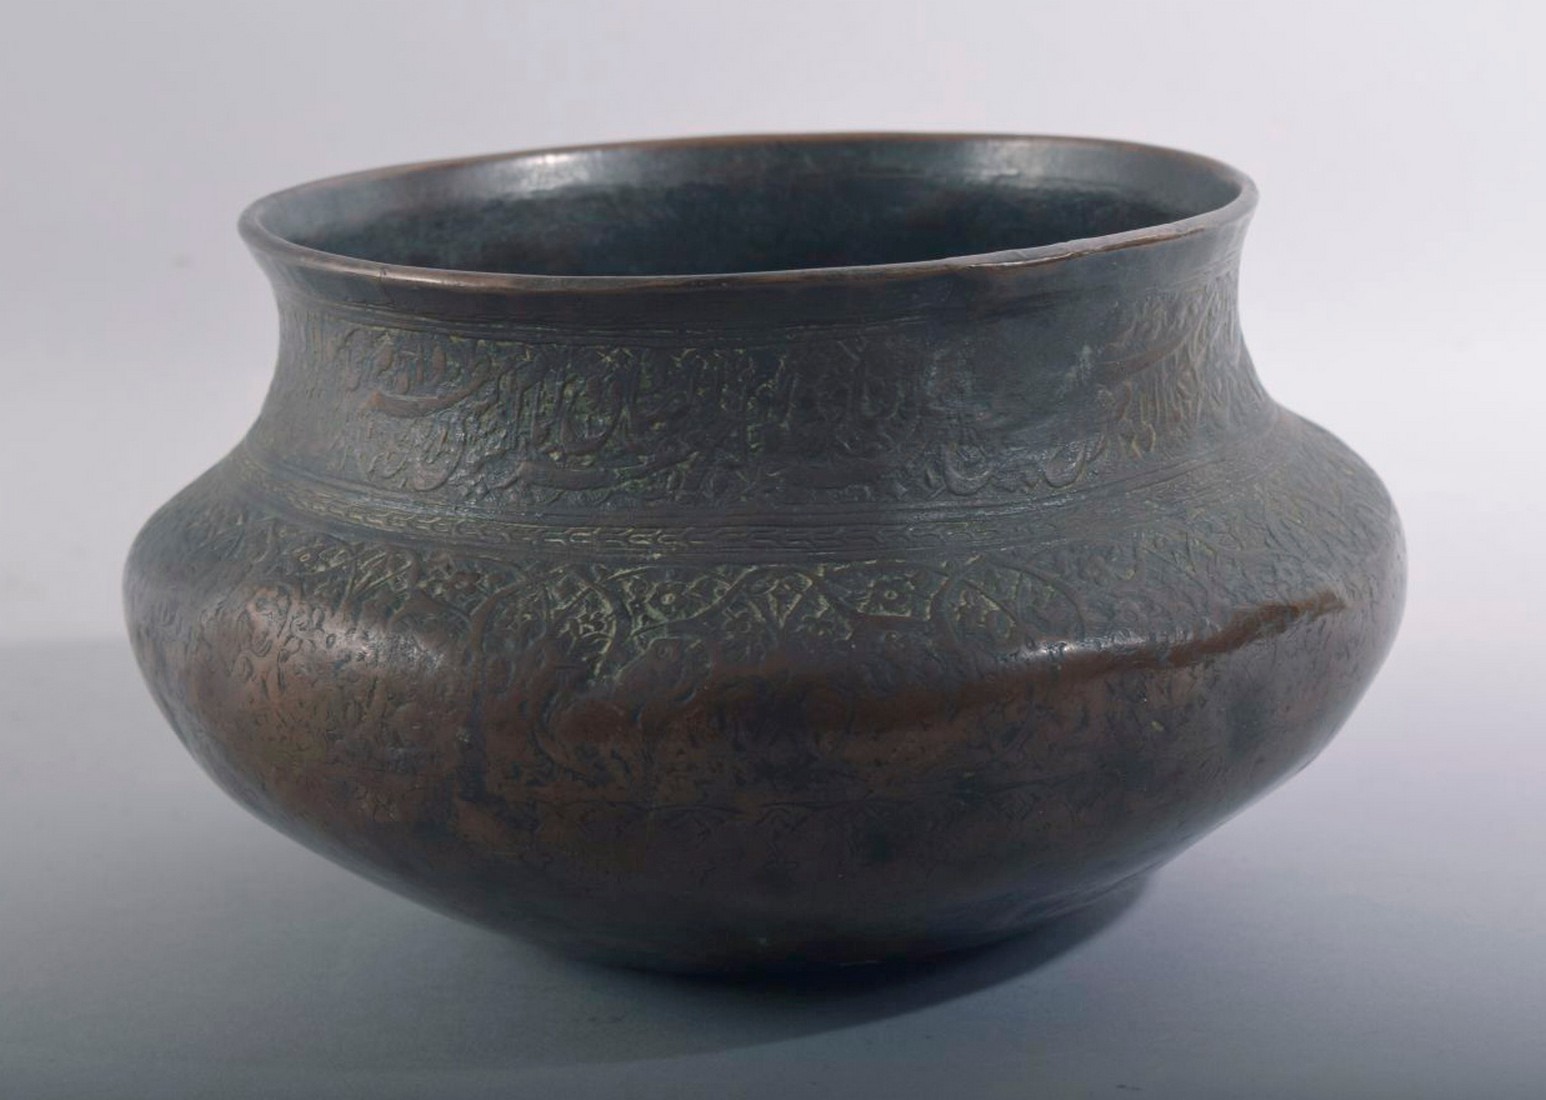 A GOOD ISLAMIC QAJAR ENGRAVED AND CHASED BRONZE BOWL, the rim engraved with a band of calligraphy - Image 4 of 6